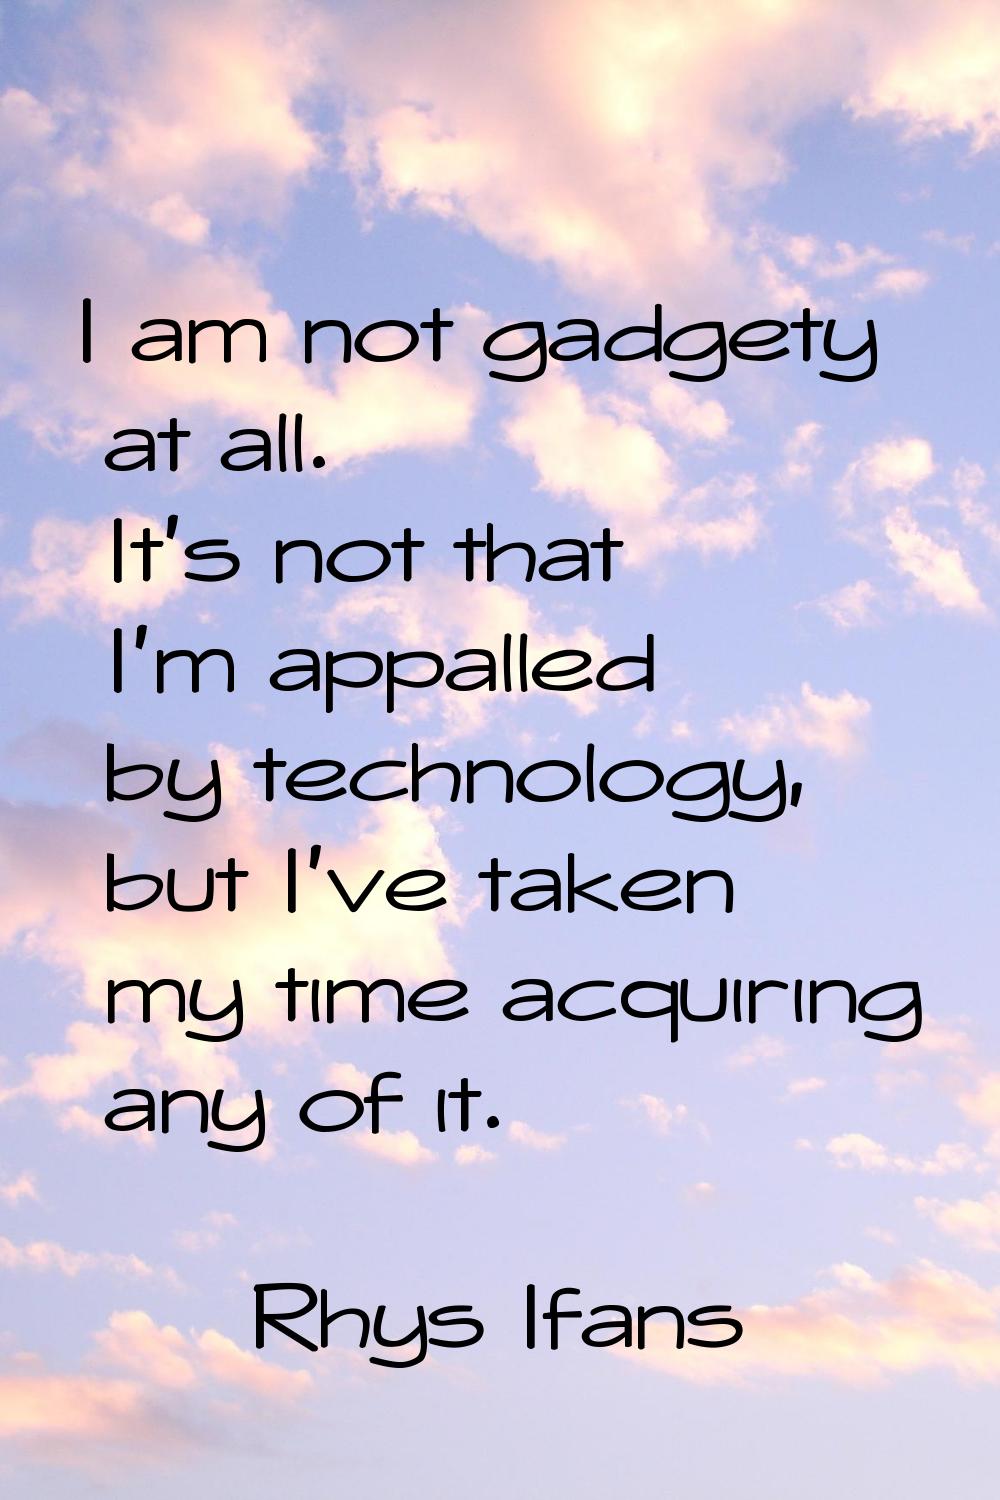 I am not gadgety at all. It's not that I'm appalled by technology, but I've taken my time acquiring